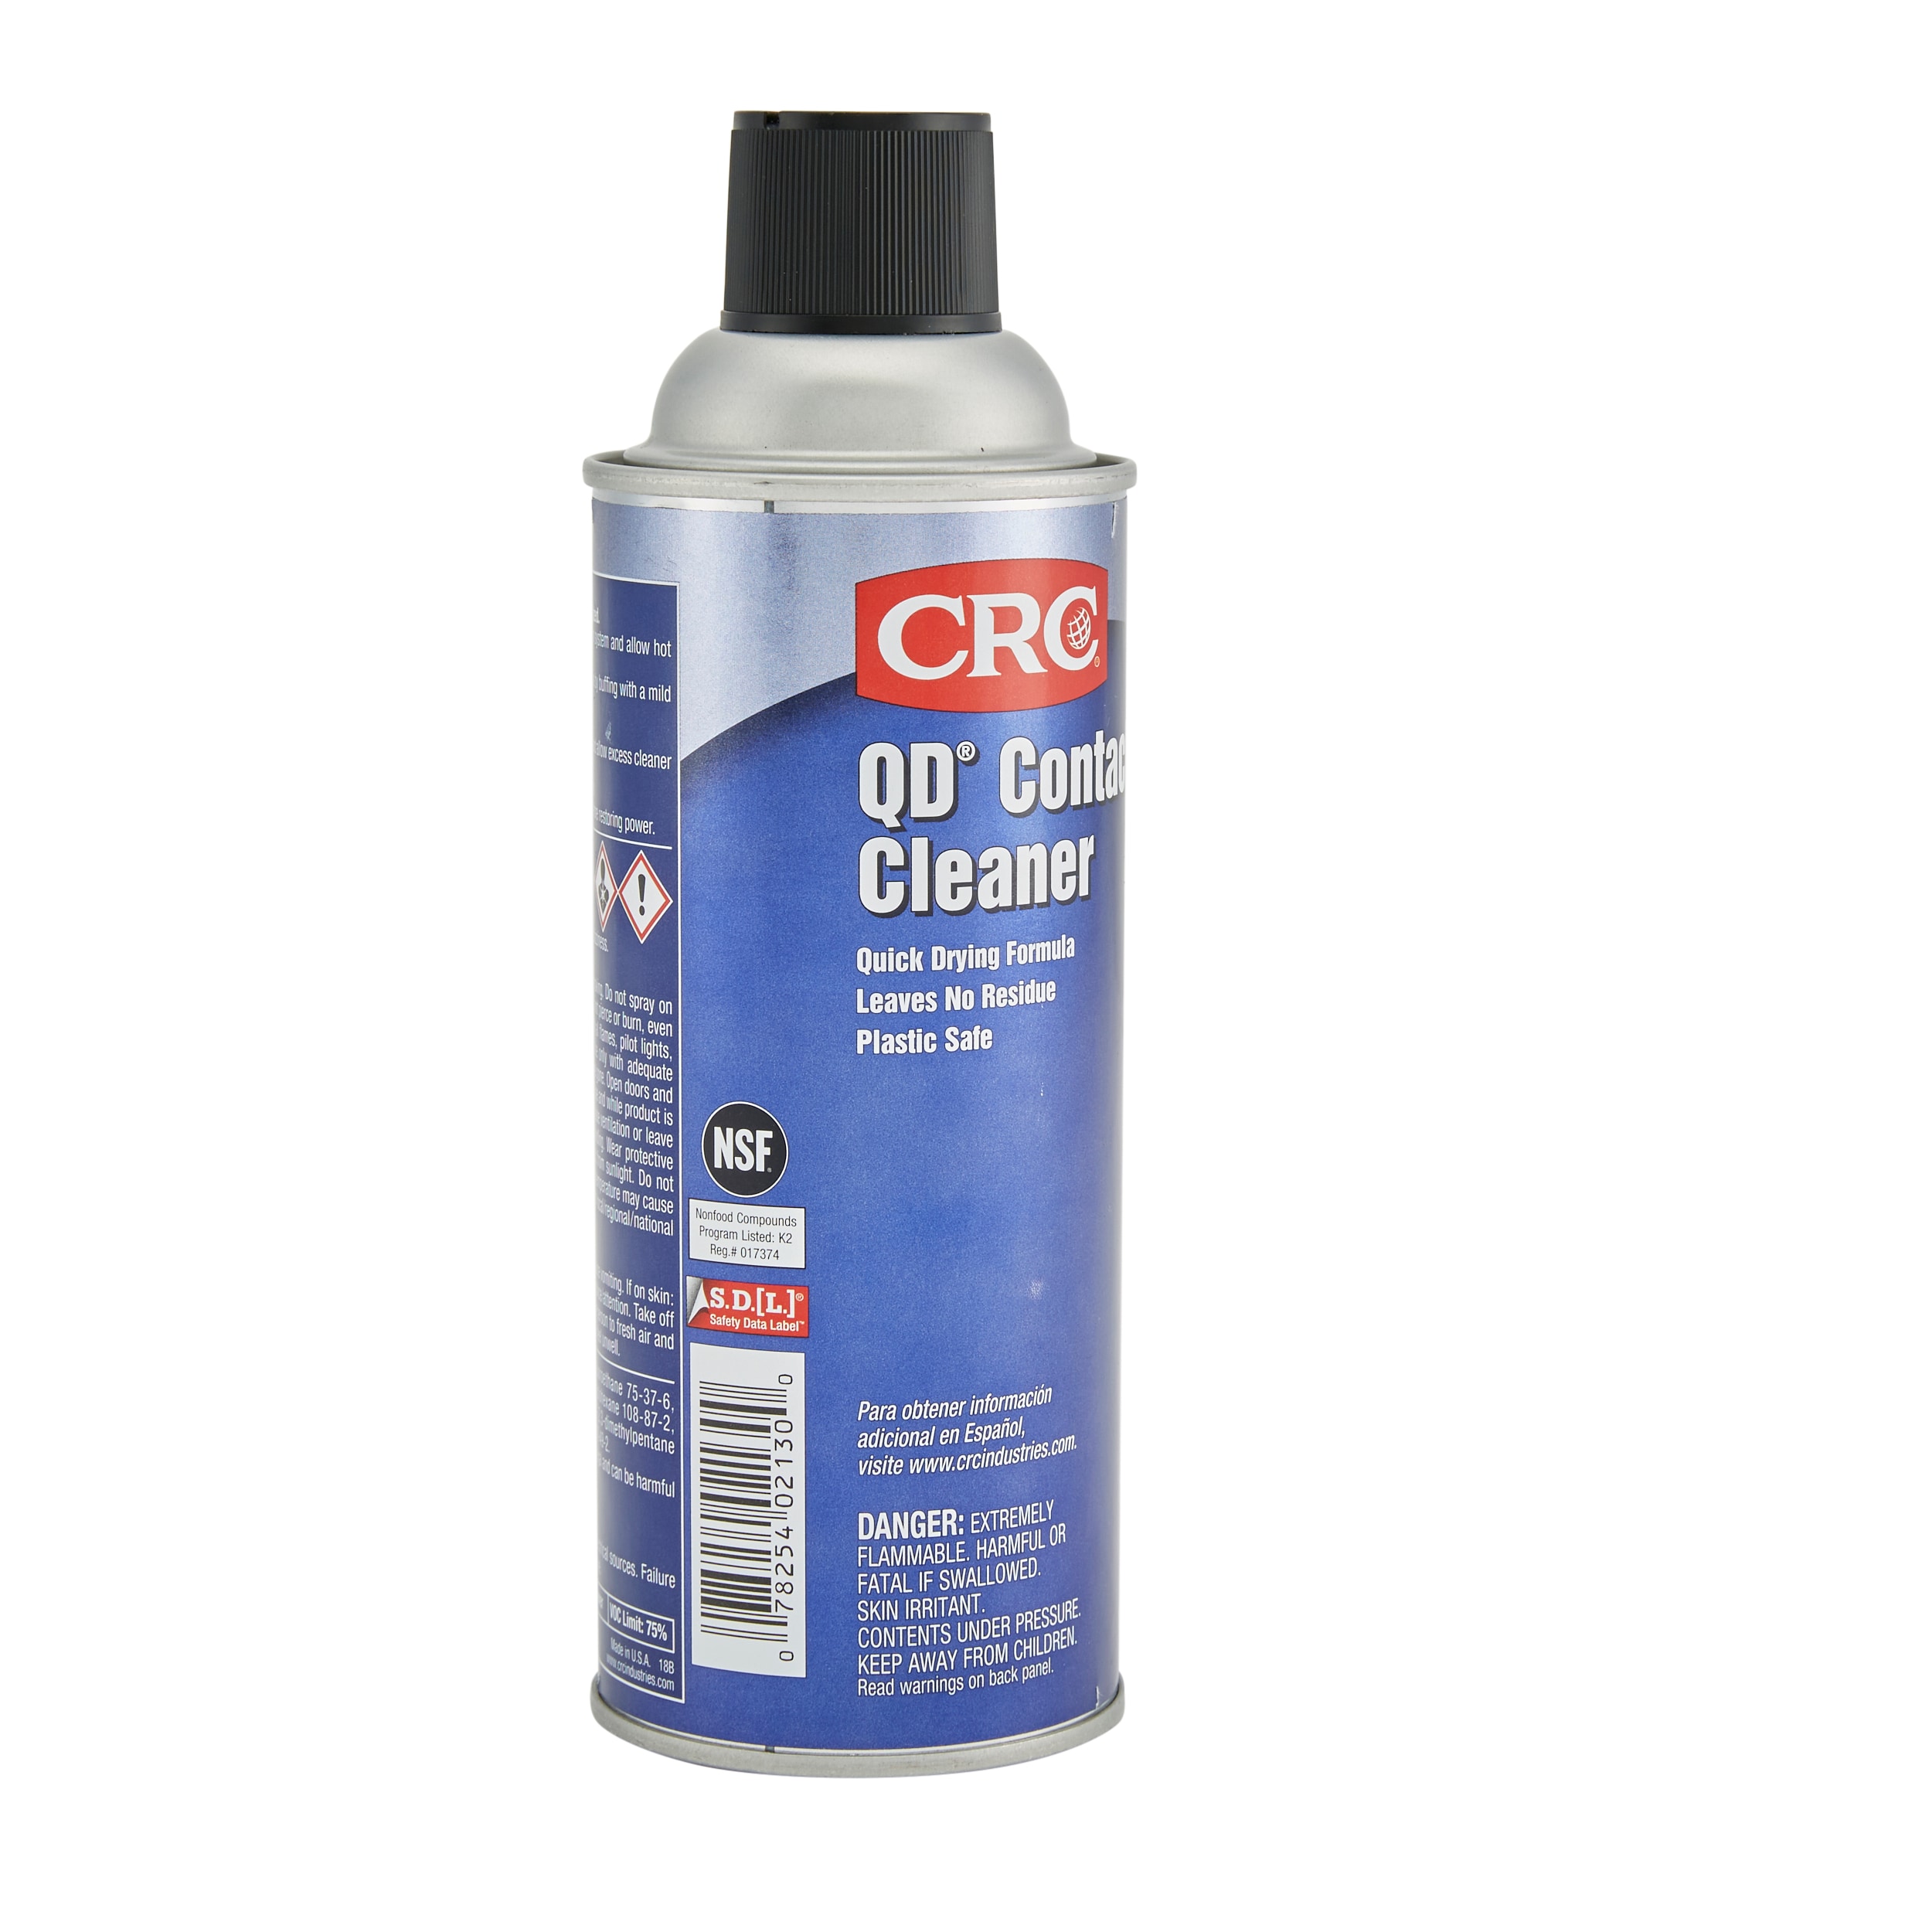 QD Contact Cleaner 250ml, CRC Quick drying for light contaminants